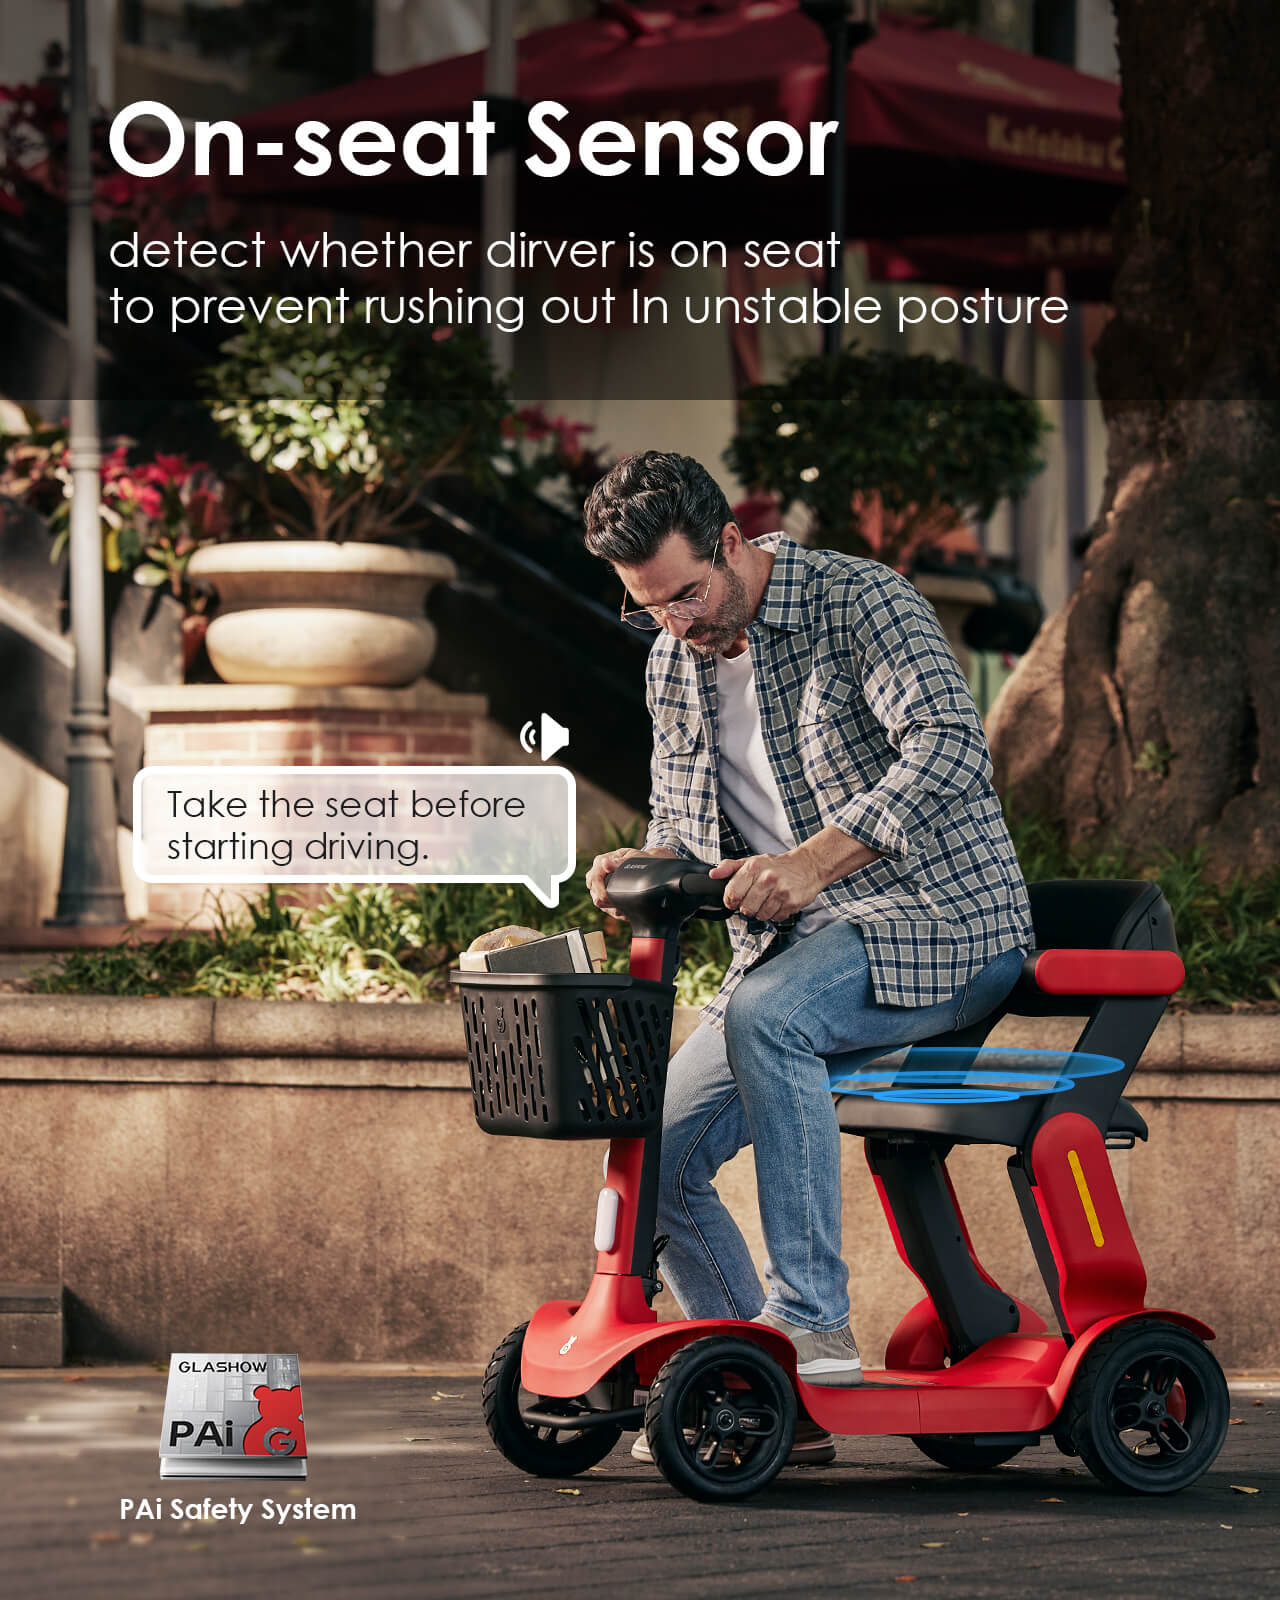 Glashow Mobility Scooter | Elevate Your Mobiity| S3 Model - A revolutional mobility scooter has arrived - on seat sensor